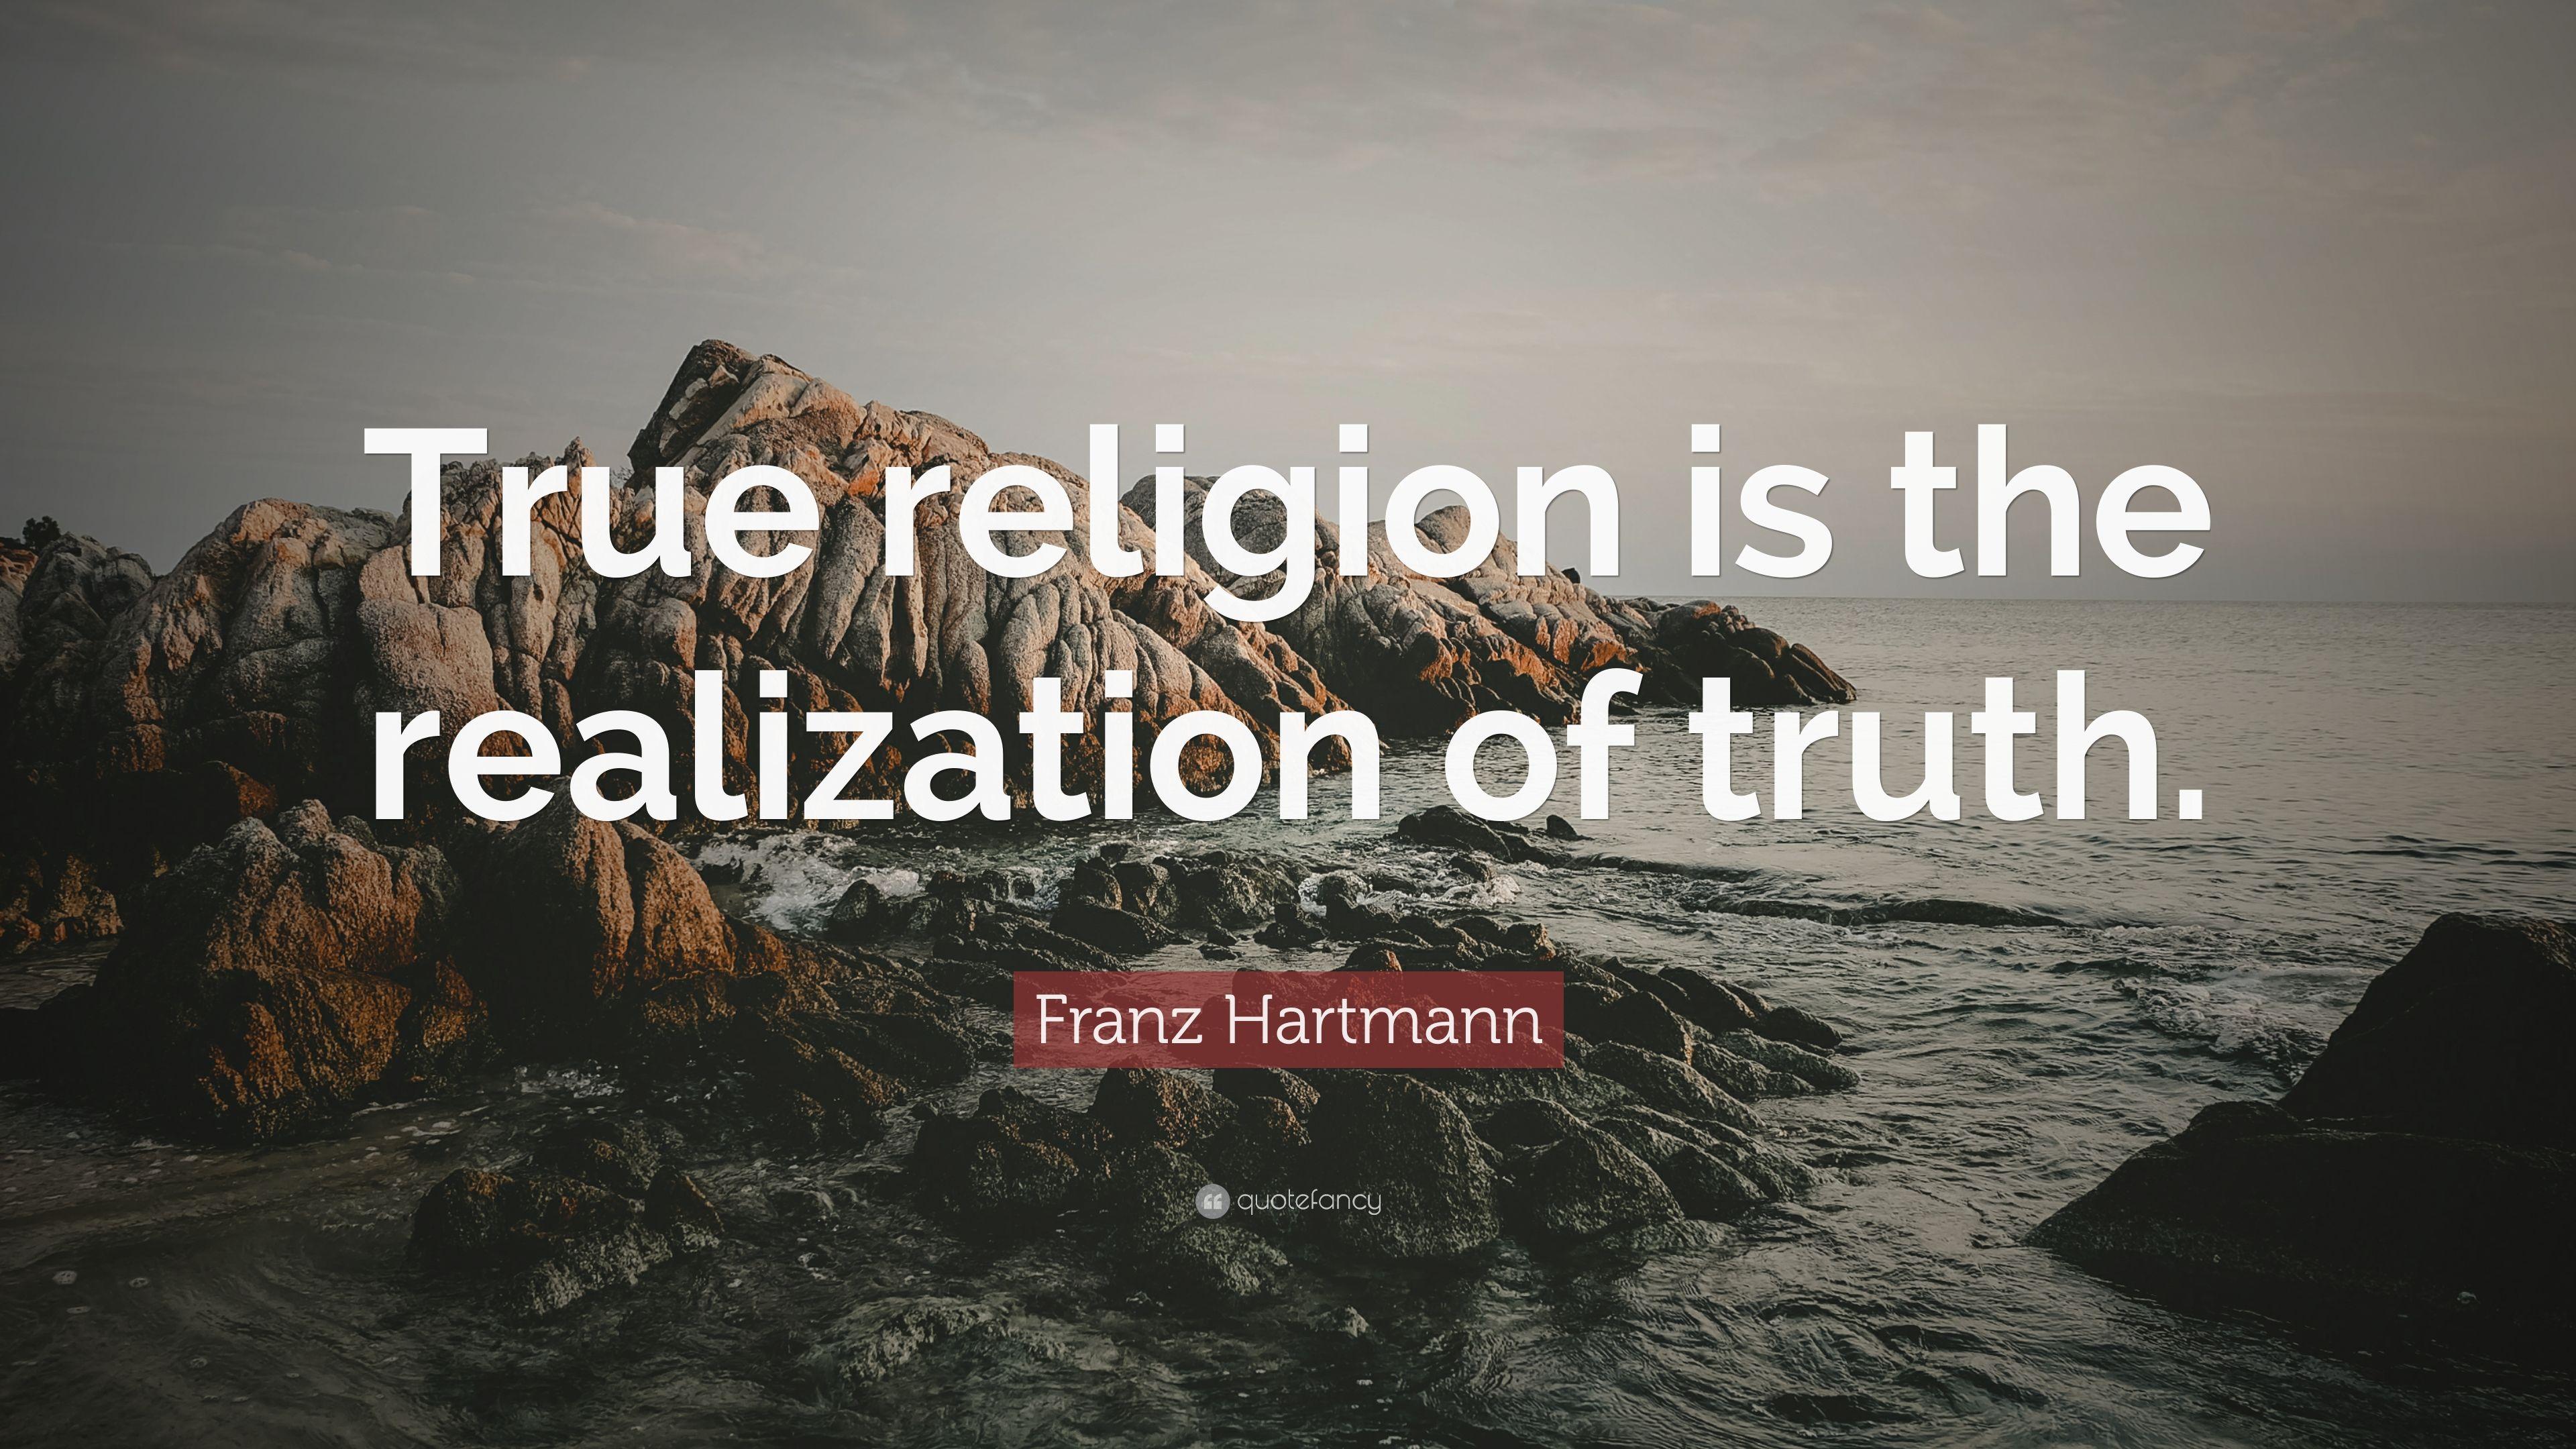 Franz Hartmann Quote: “True religion is the realization of truth